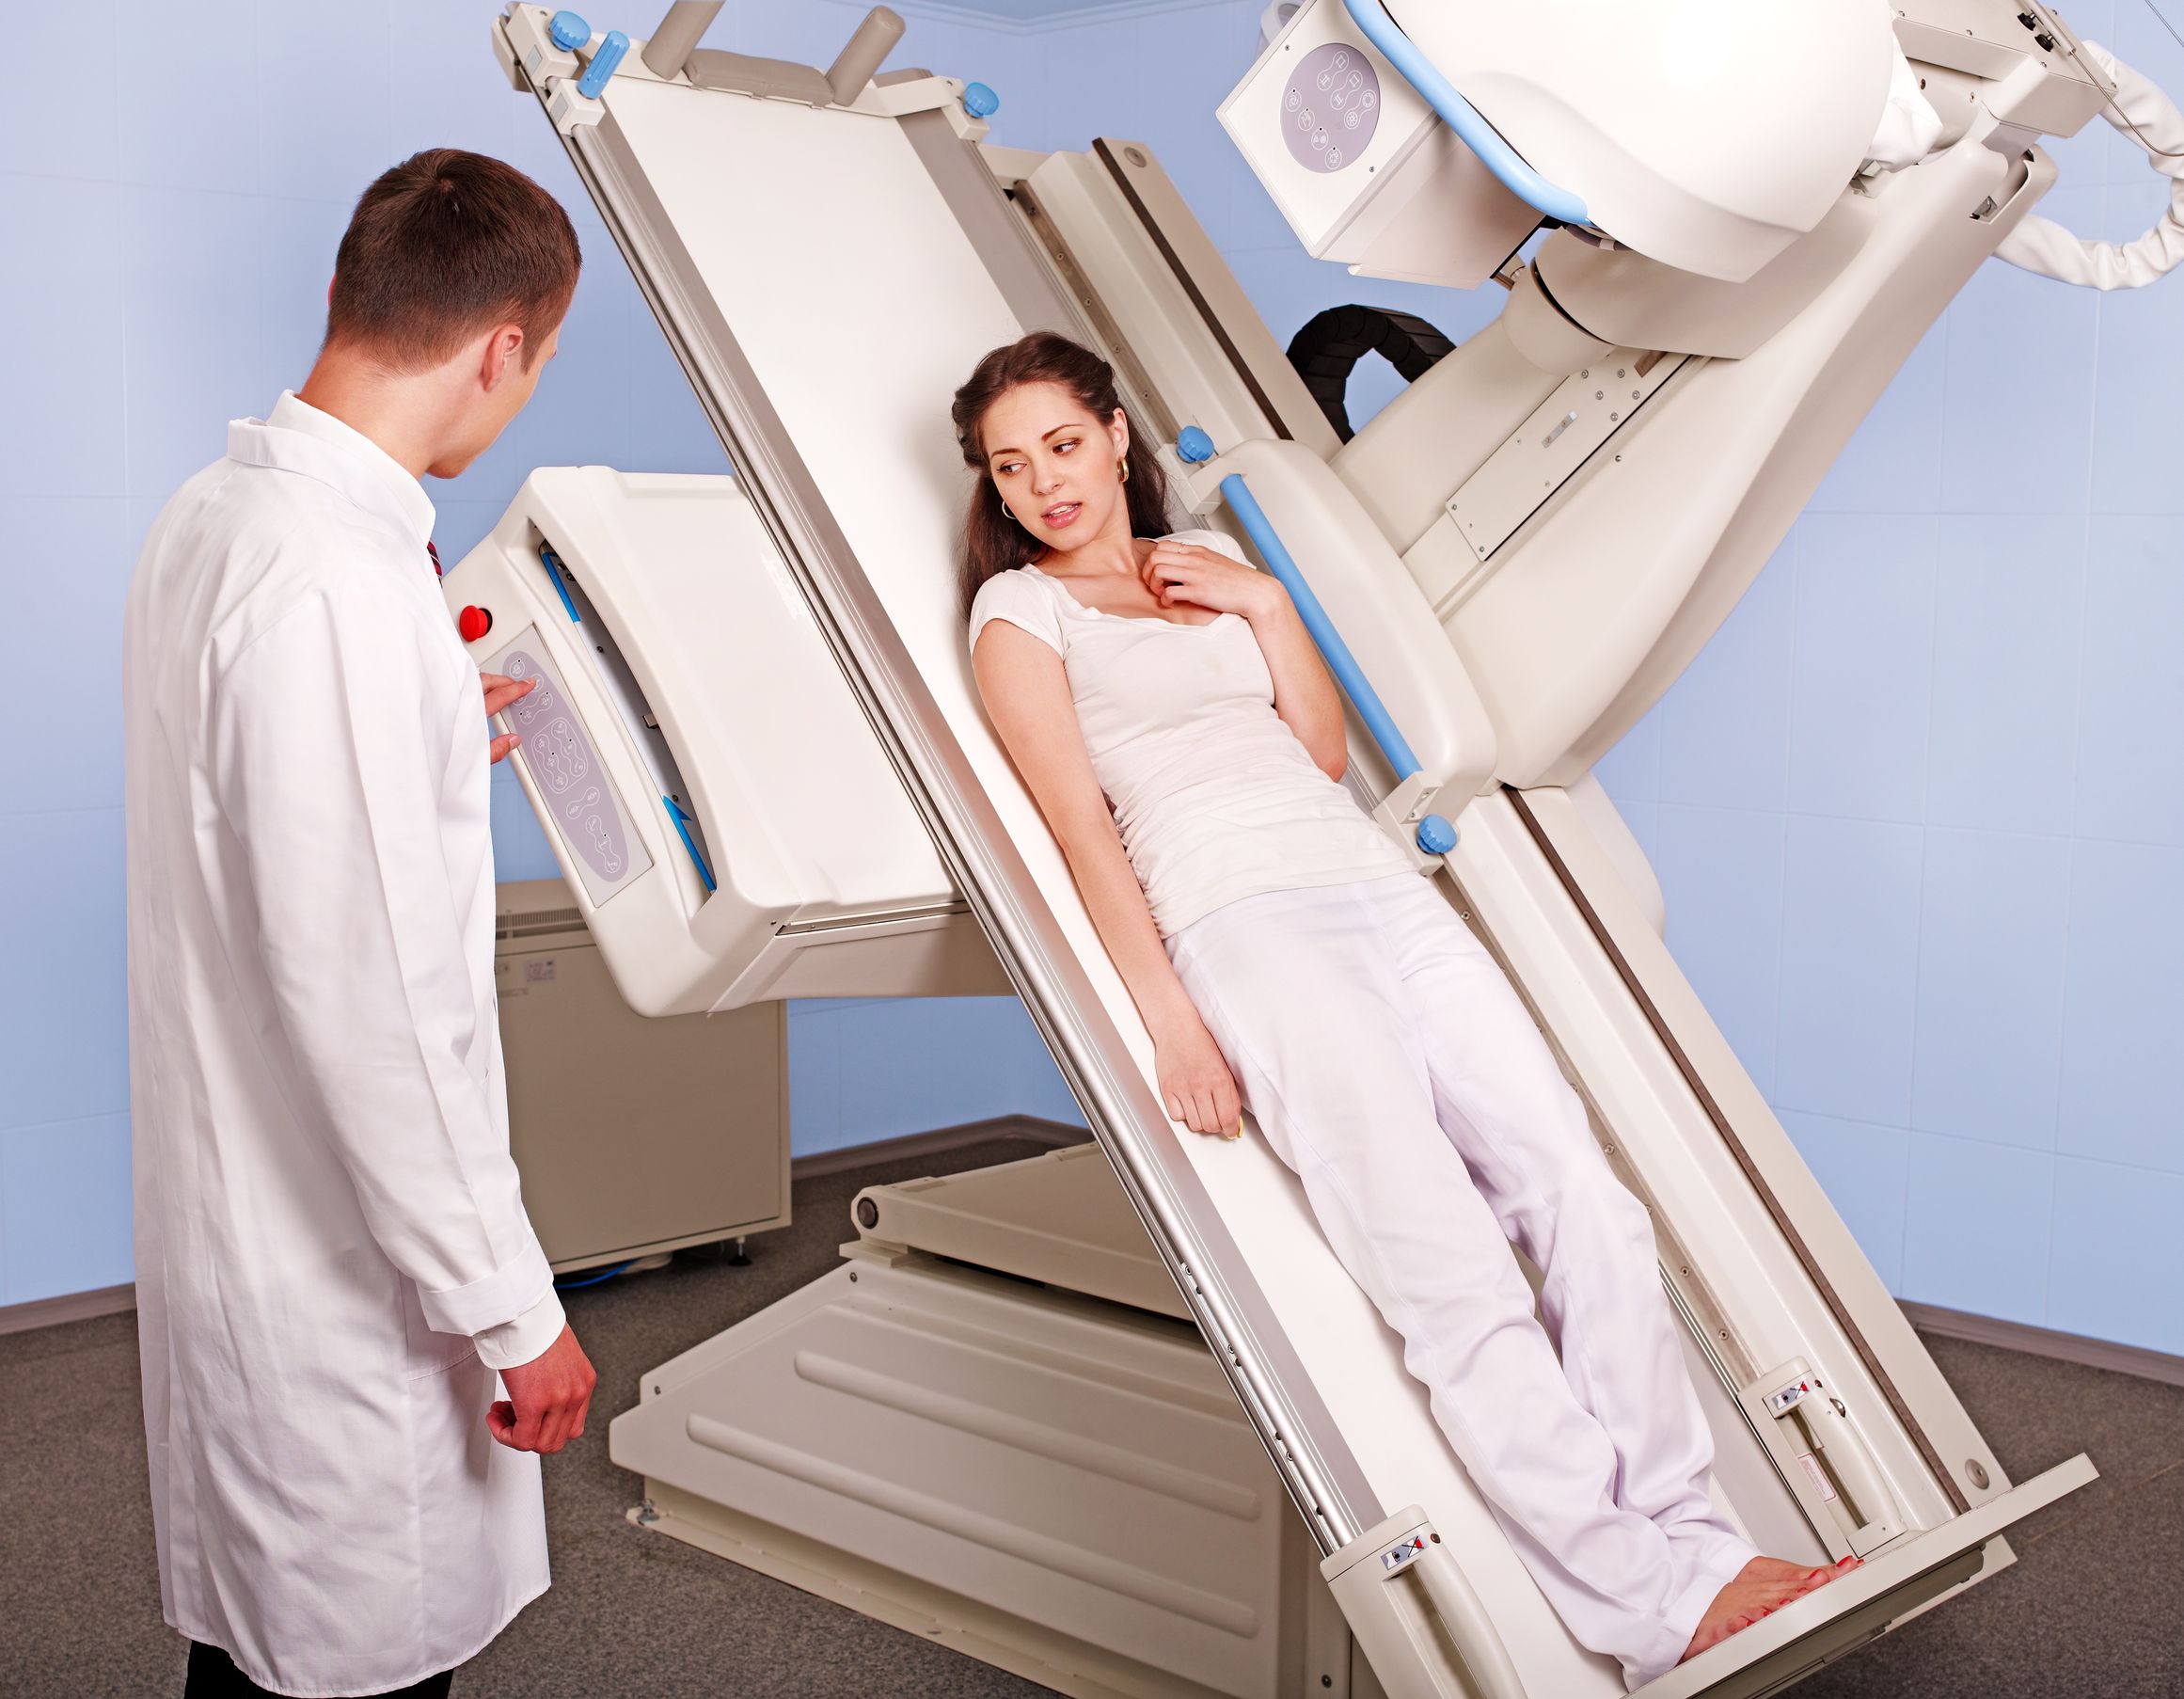 3 Reasons to Request an Open MRI For Your Medical Scans in Orlando